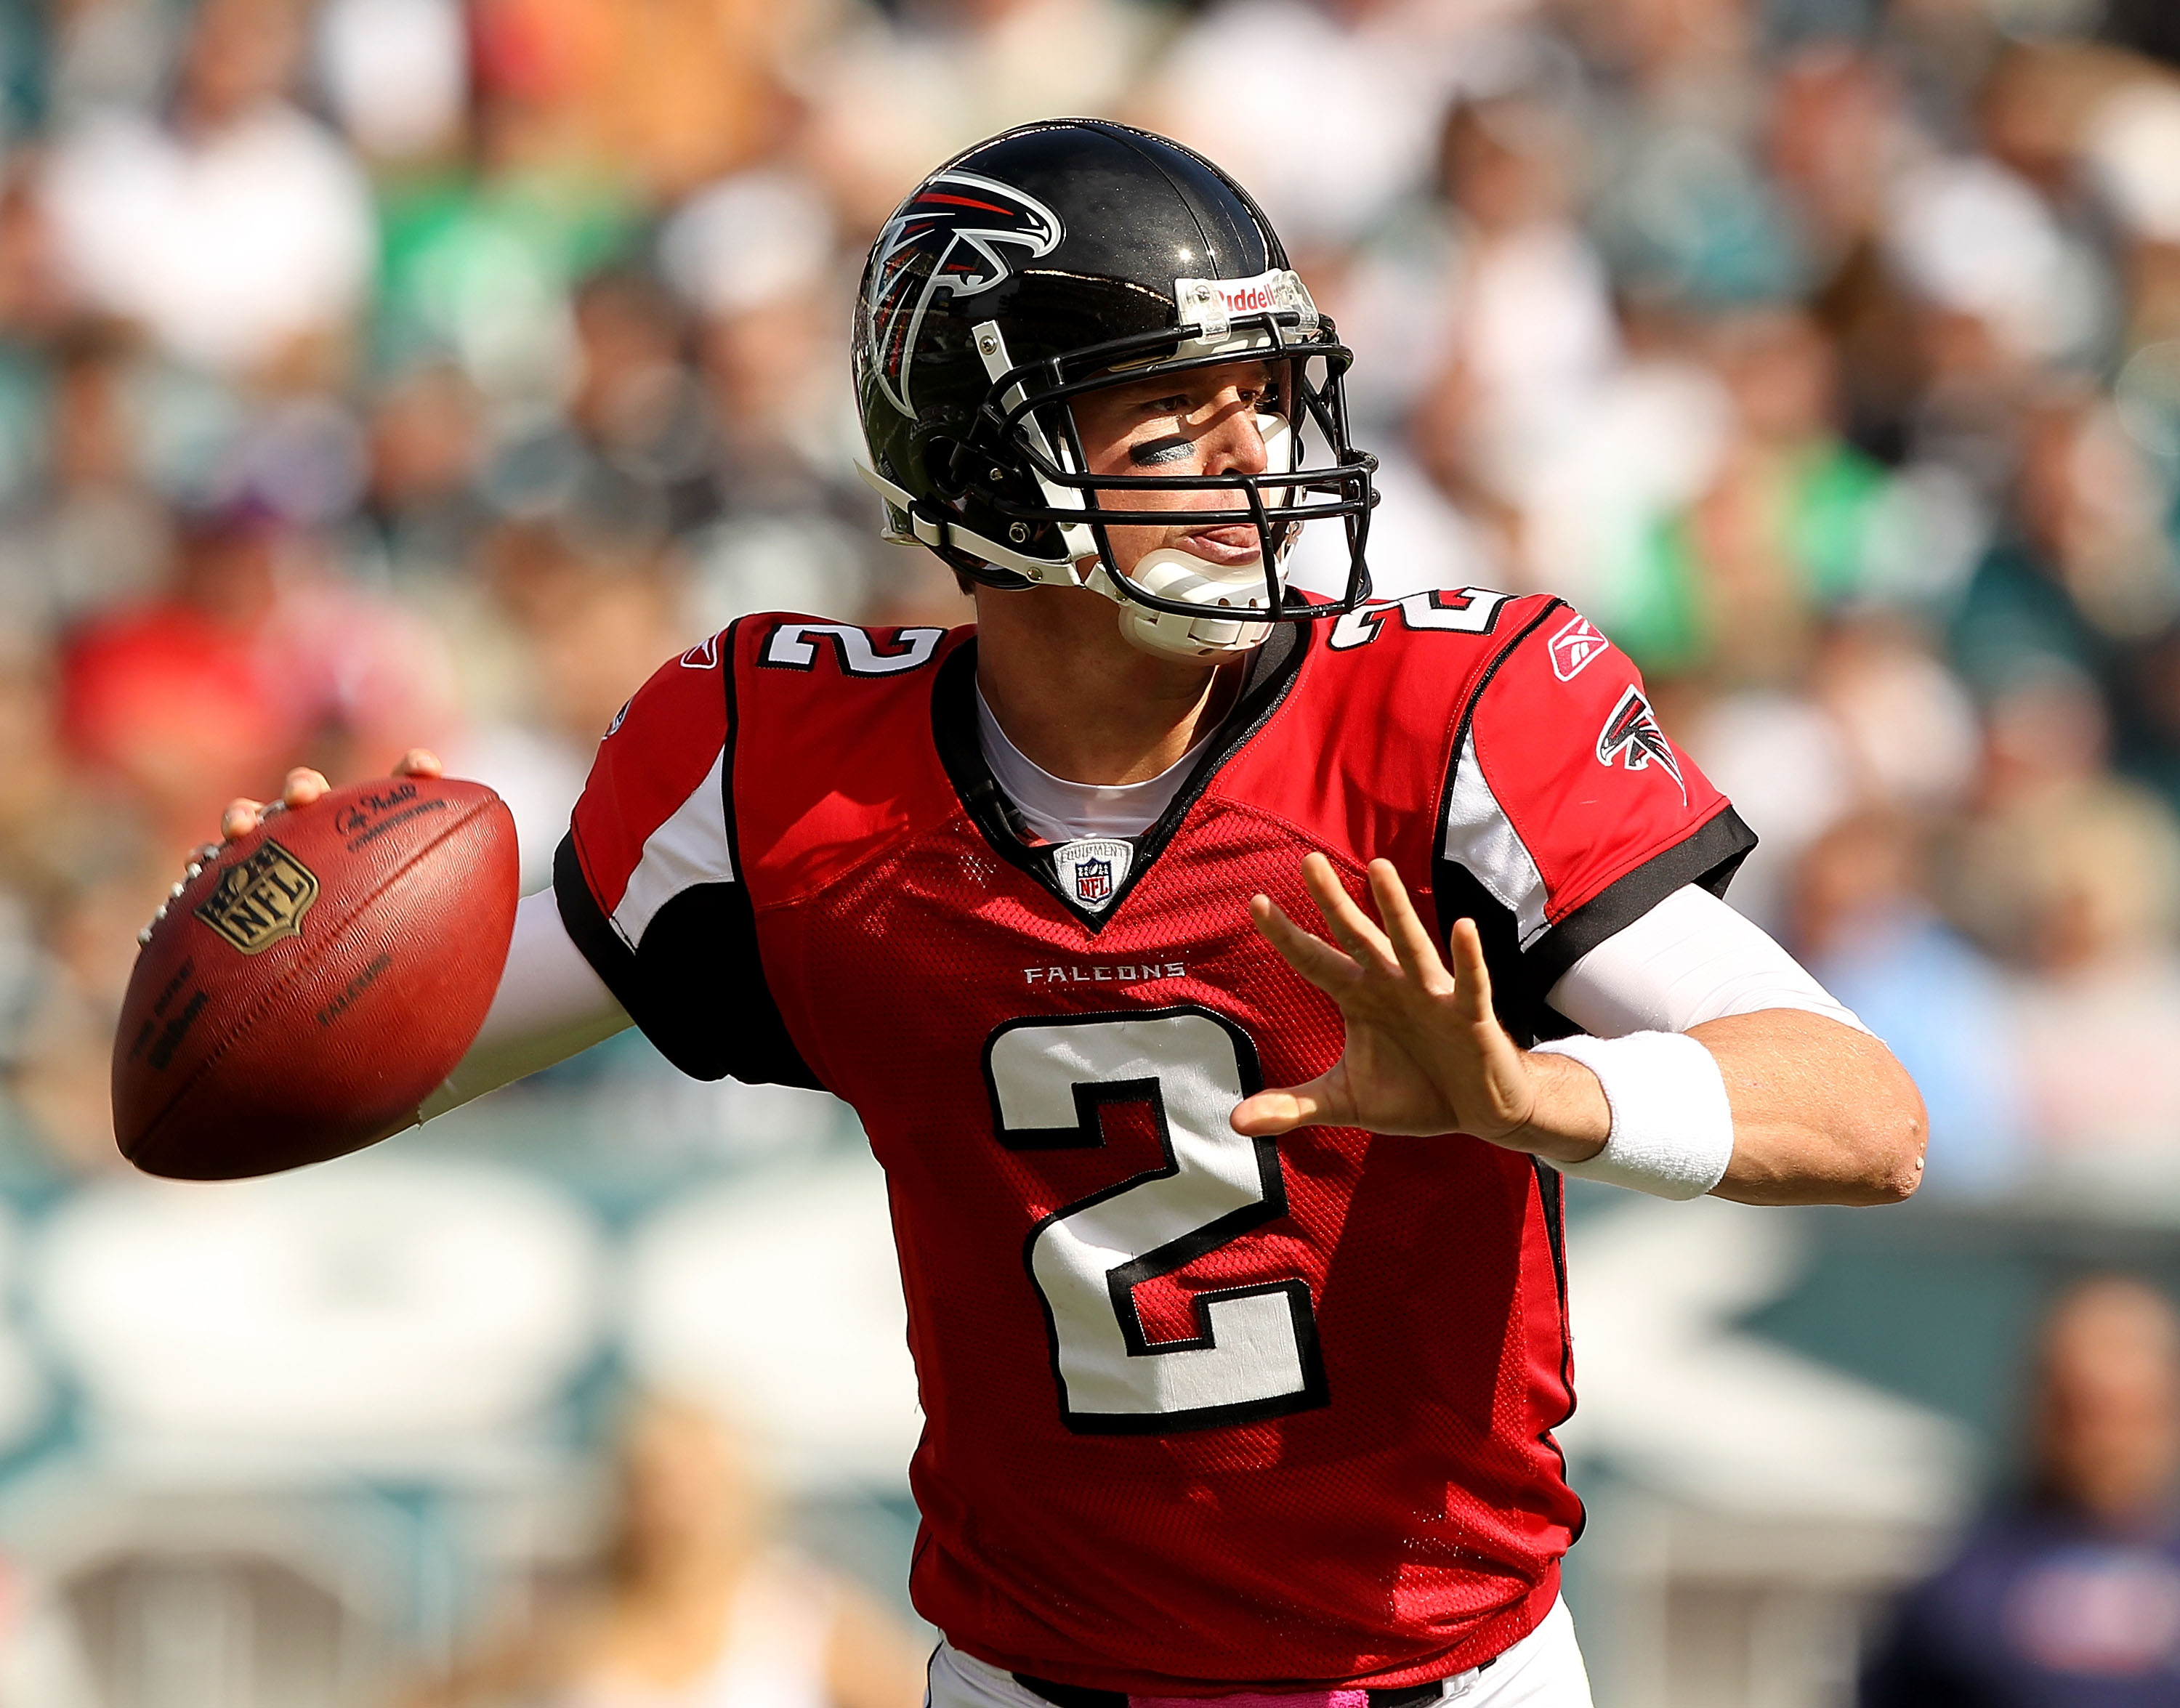 PHILADELPHIA - OCTOBER 17: Matt Ryan #2 of the Atlanta Falcons passes against  the Philadelphia Eagles during their game at Lincoln Financial Field on October 17, 2010 in Philadelphia, Pennsylvania.  (Photo by Al Bello/Getty Images)